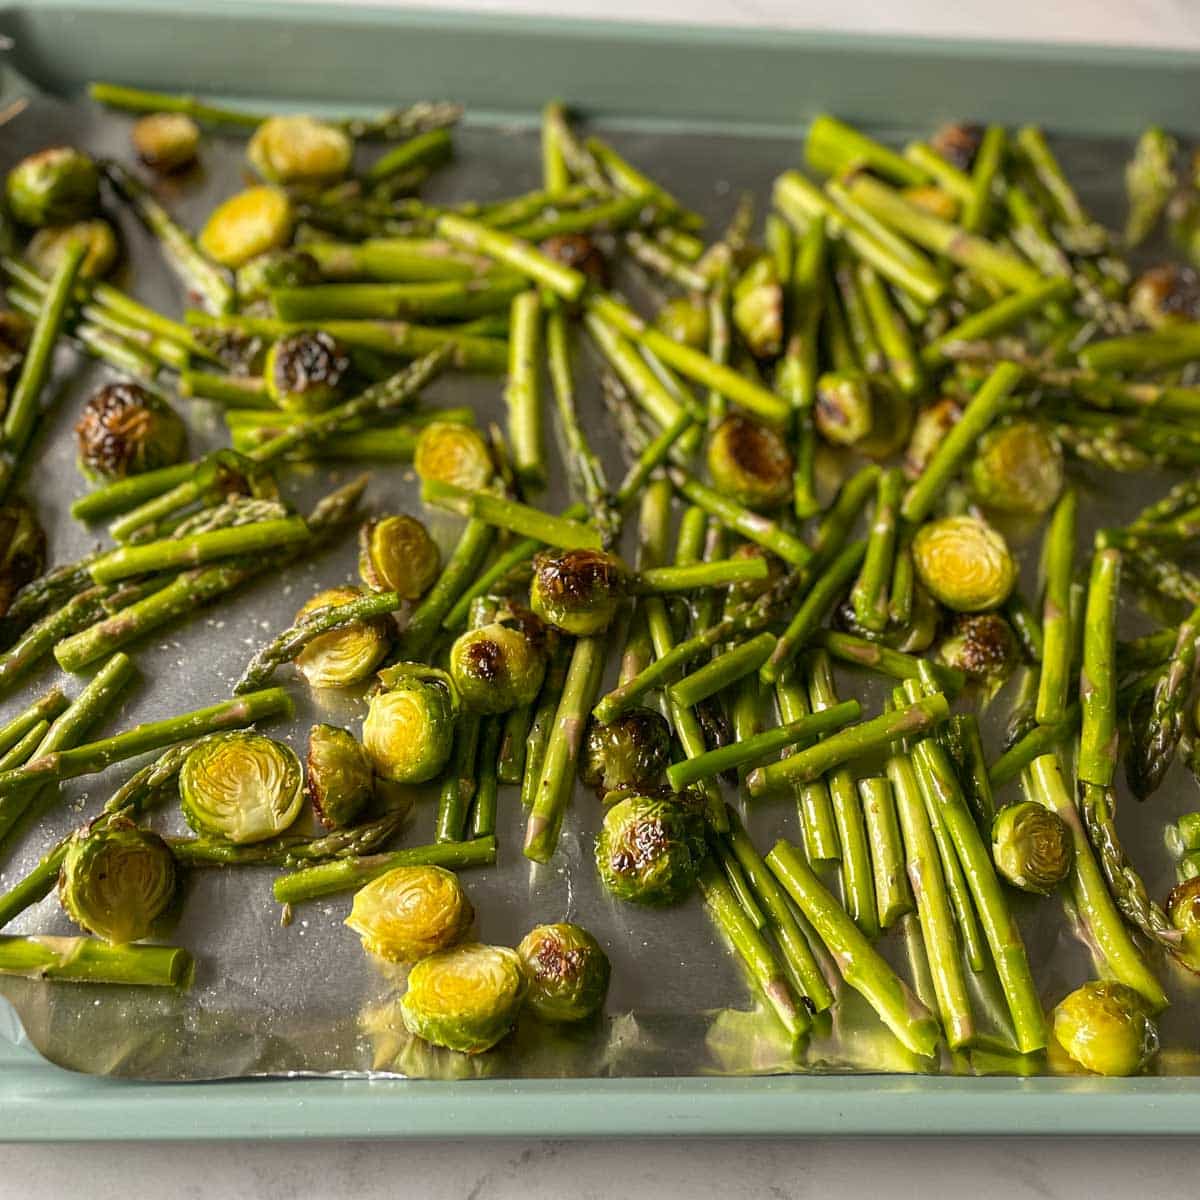 Asparagus is added to the sheet tray with the brussels sprouts.